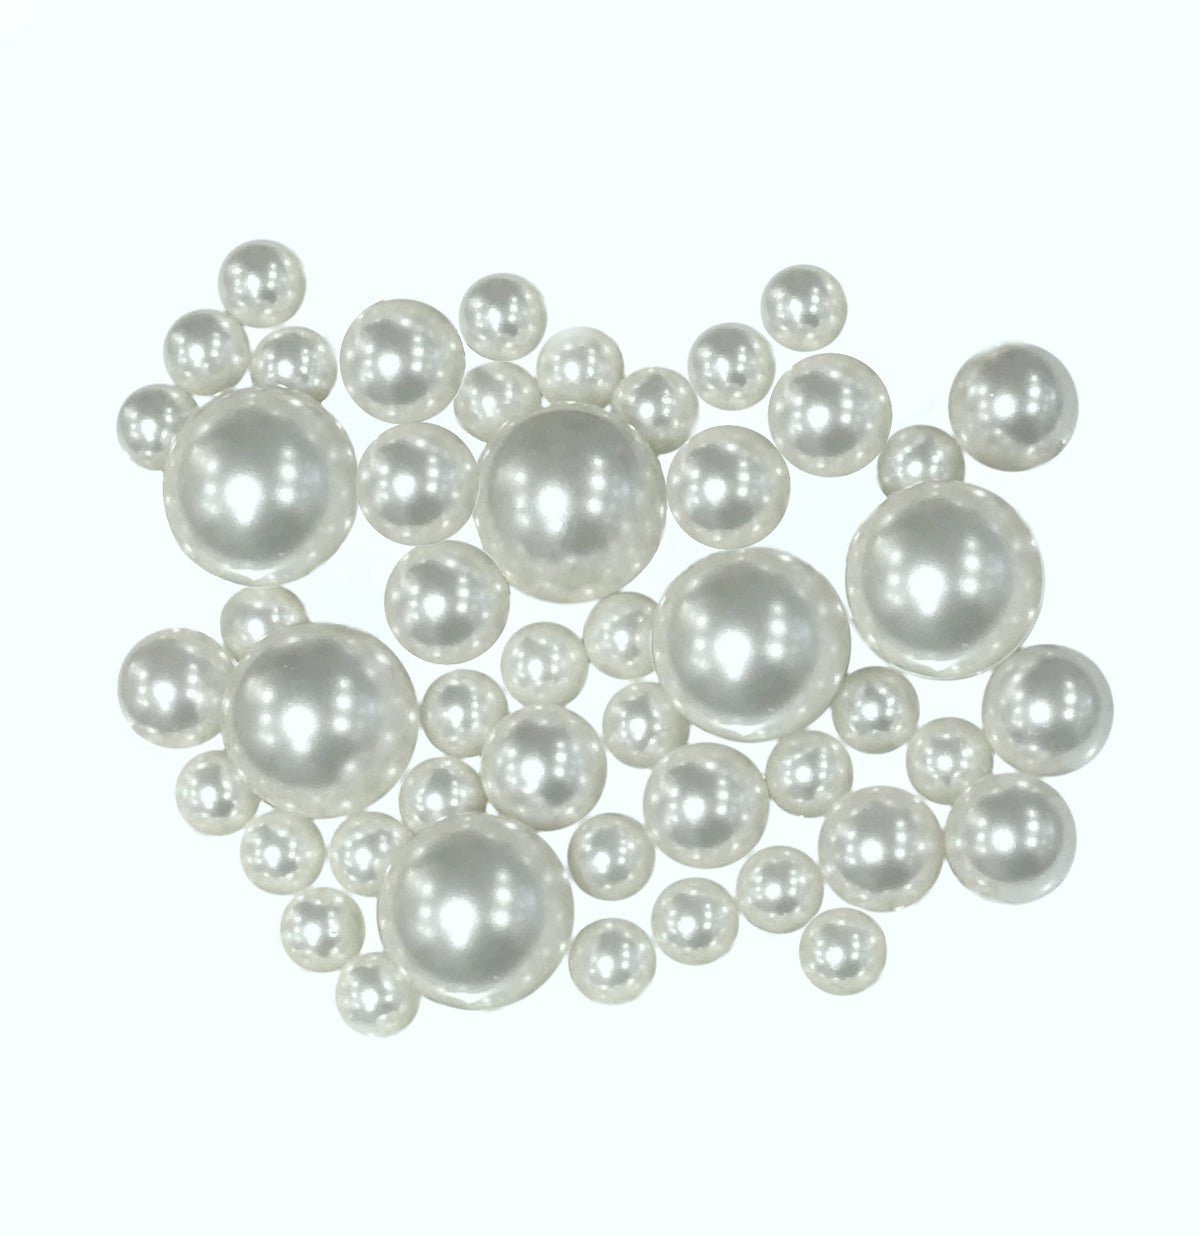 Floating White Pearls-Shiny-Jumbo Sizes-Fills 1 Gallon of Floating Pearls & Transparent Gels For Your Vases-With Measured Transparent Gels Floating Kit-Option: 3 Submersible Fairy Lights-Vase Decorations